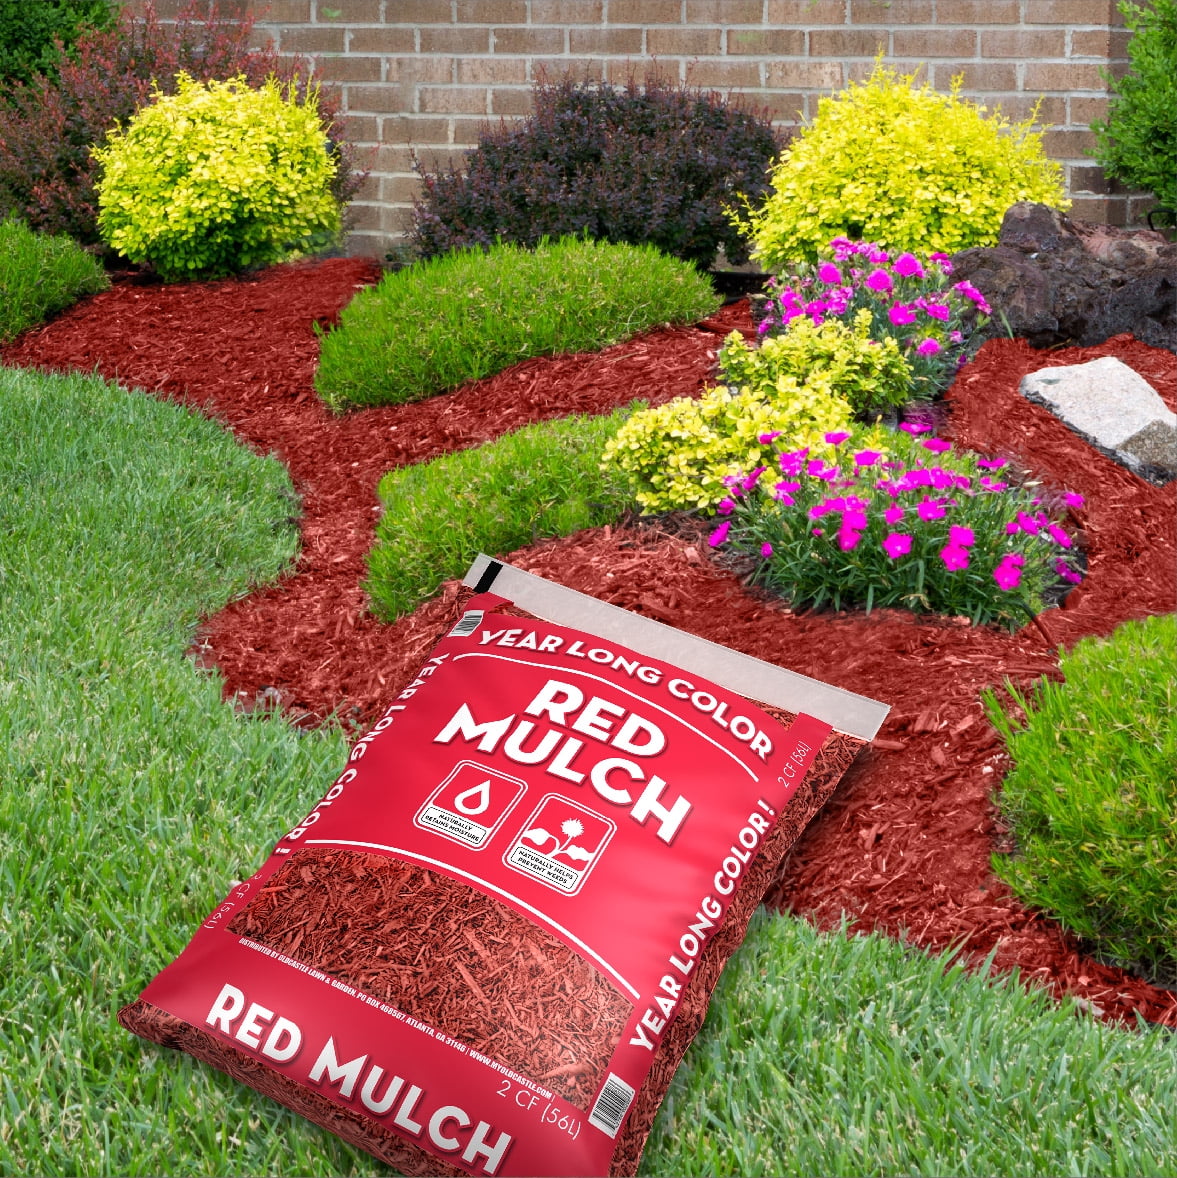 Image of Red mulch 2 yards